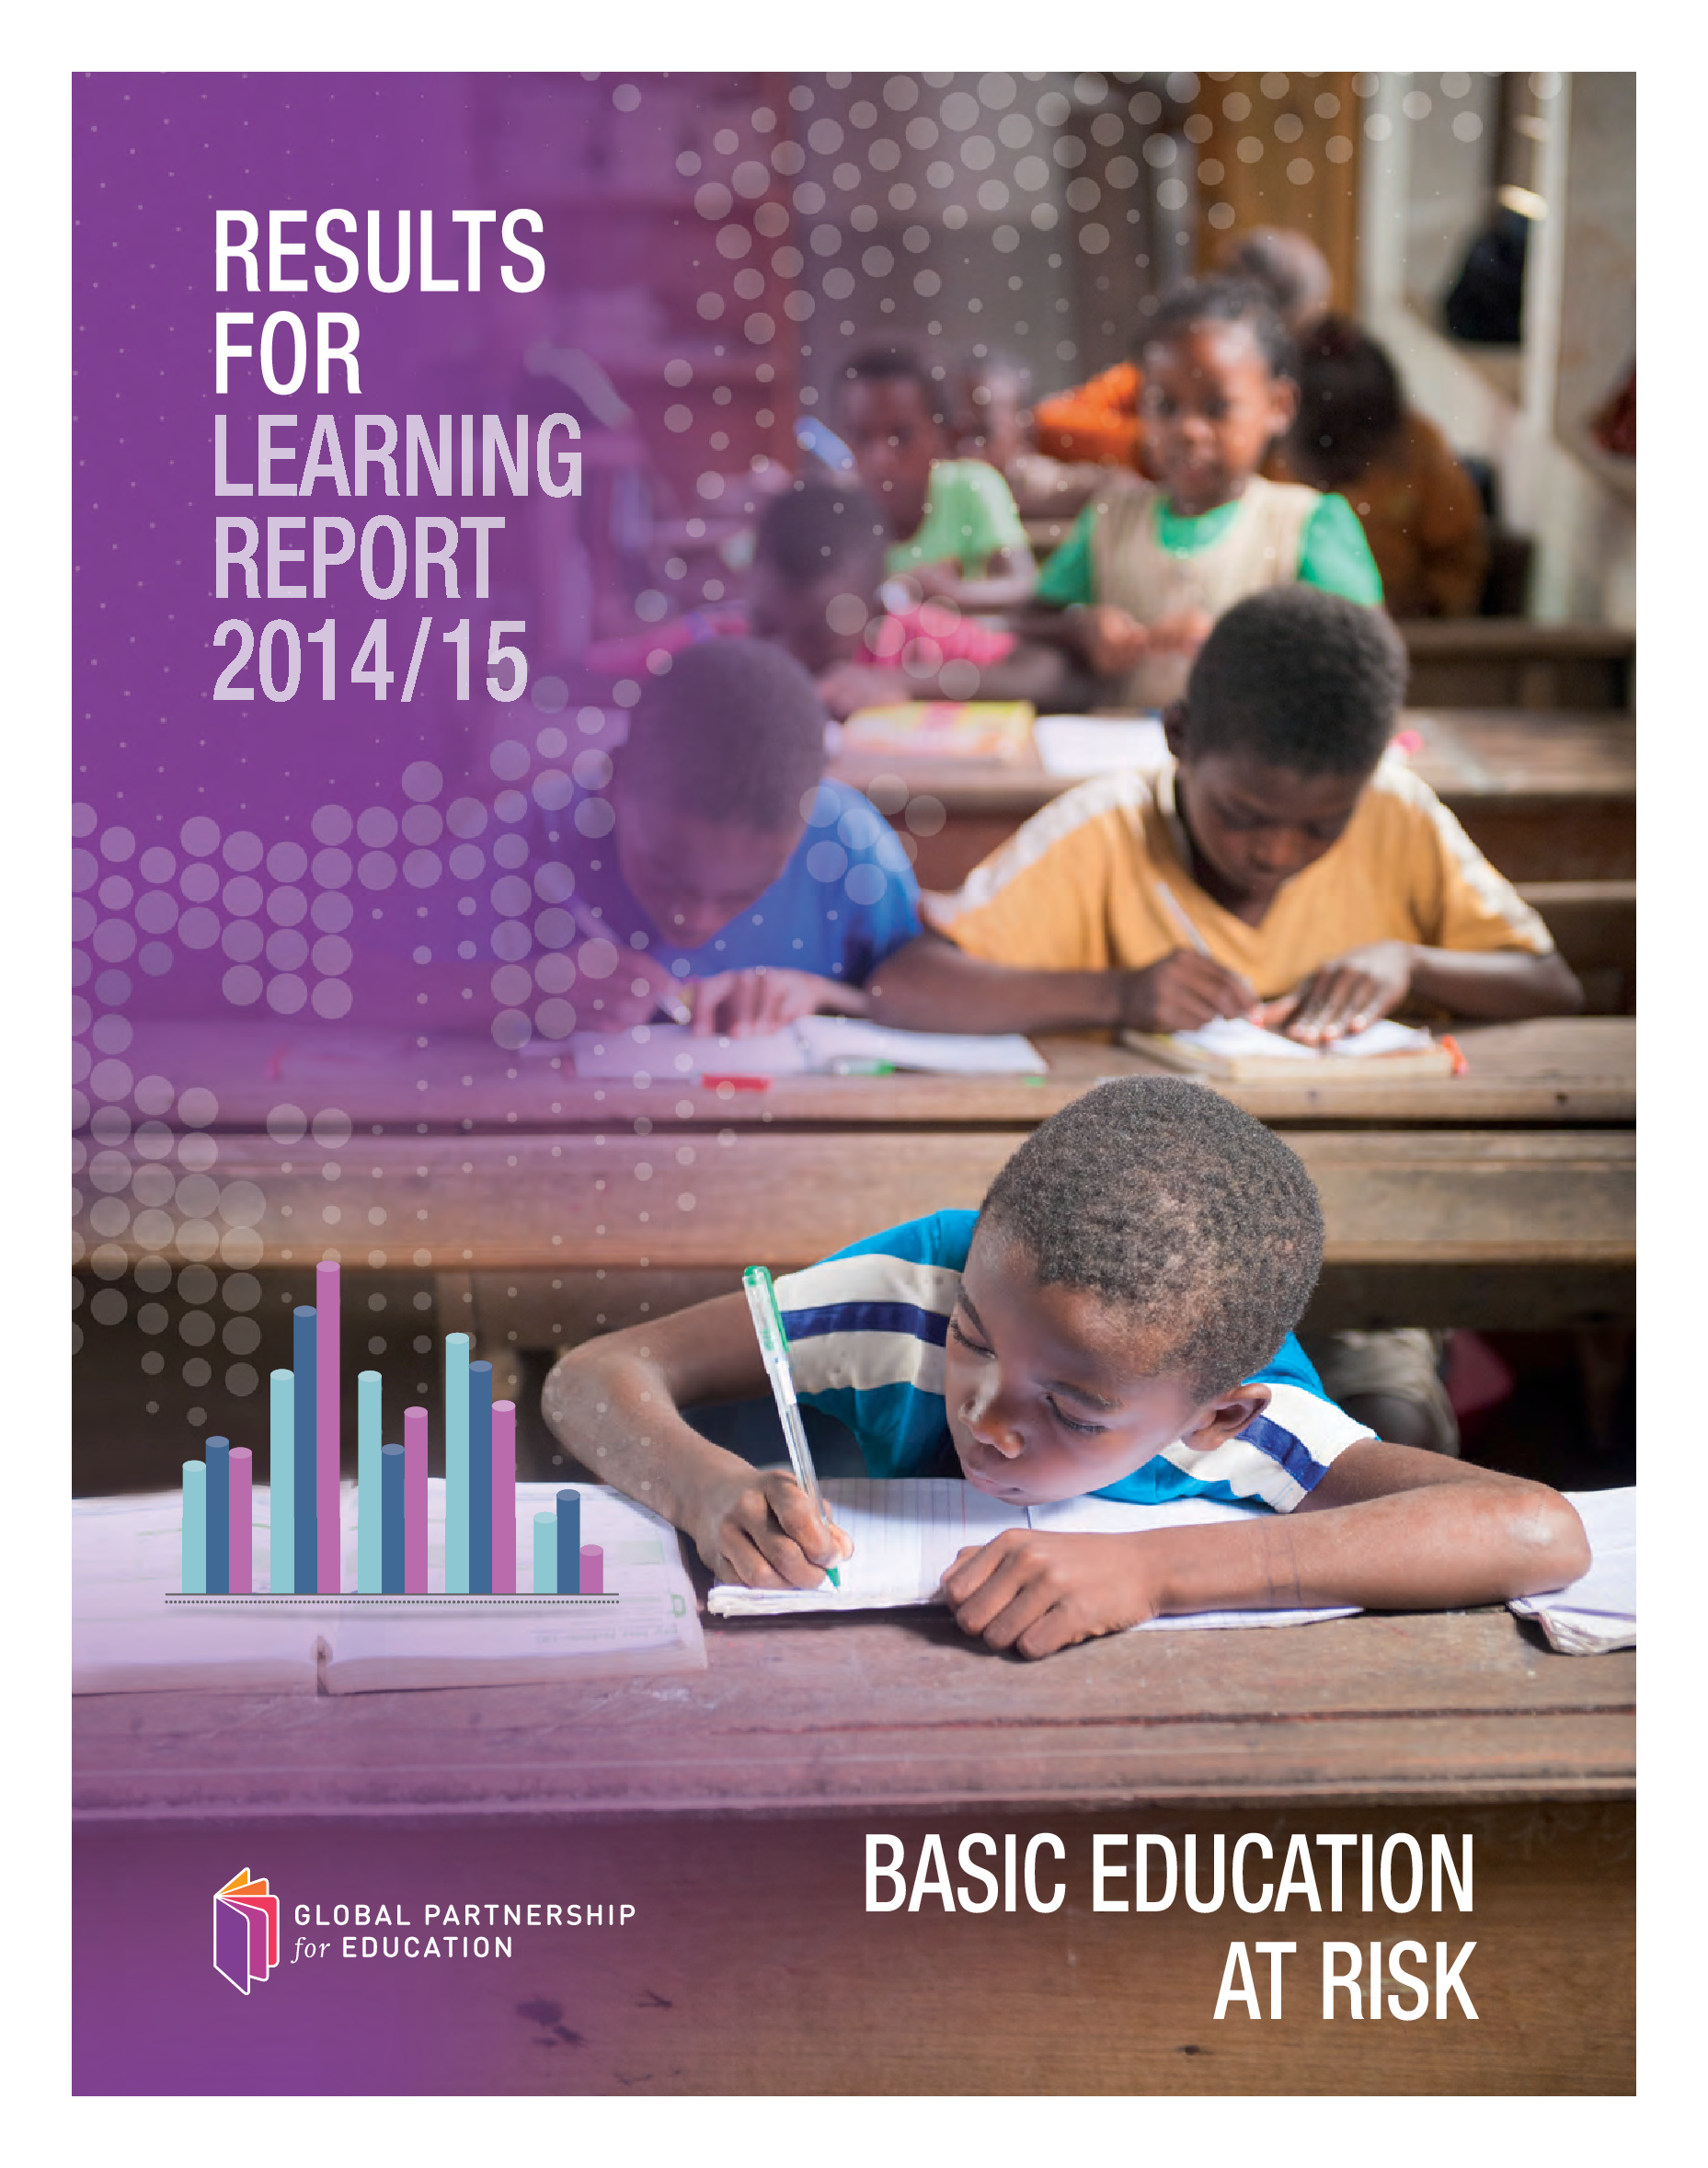 The 2014/2015 Results for Learning Report: Basic Education at Risk examines the progress achieved by GPE partner developing countries over the period 2008-2012.